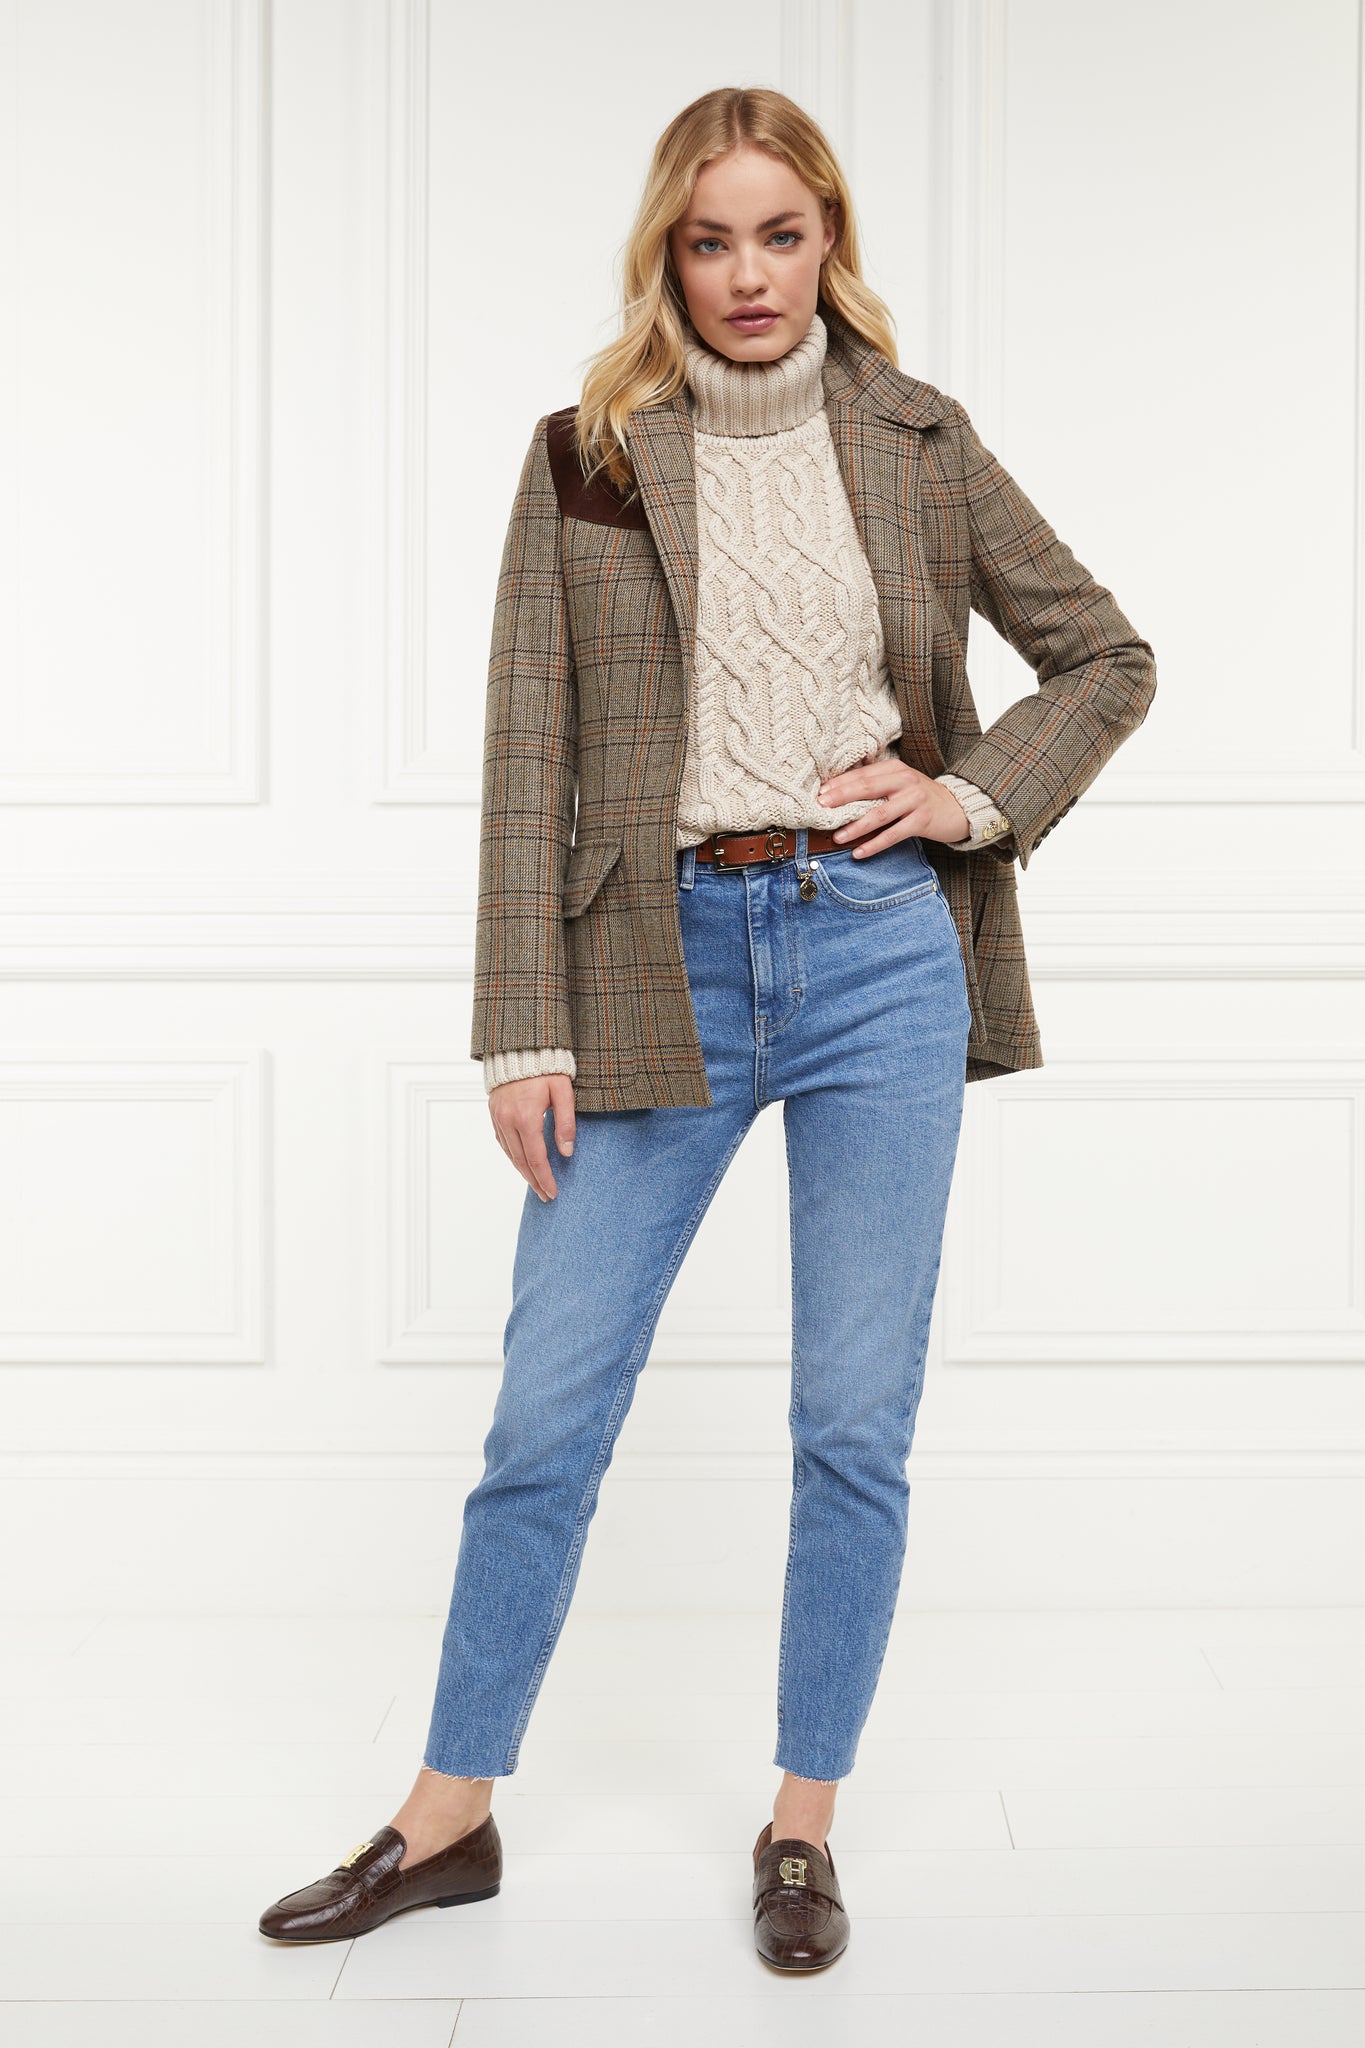 brown croc embossed leather loafers with a slightly pointed toe and gold hardware to the top, paired with a cable roll neck knit in natural and a bredon tweed blazer, brown leather belt and denim slim jeans